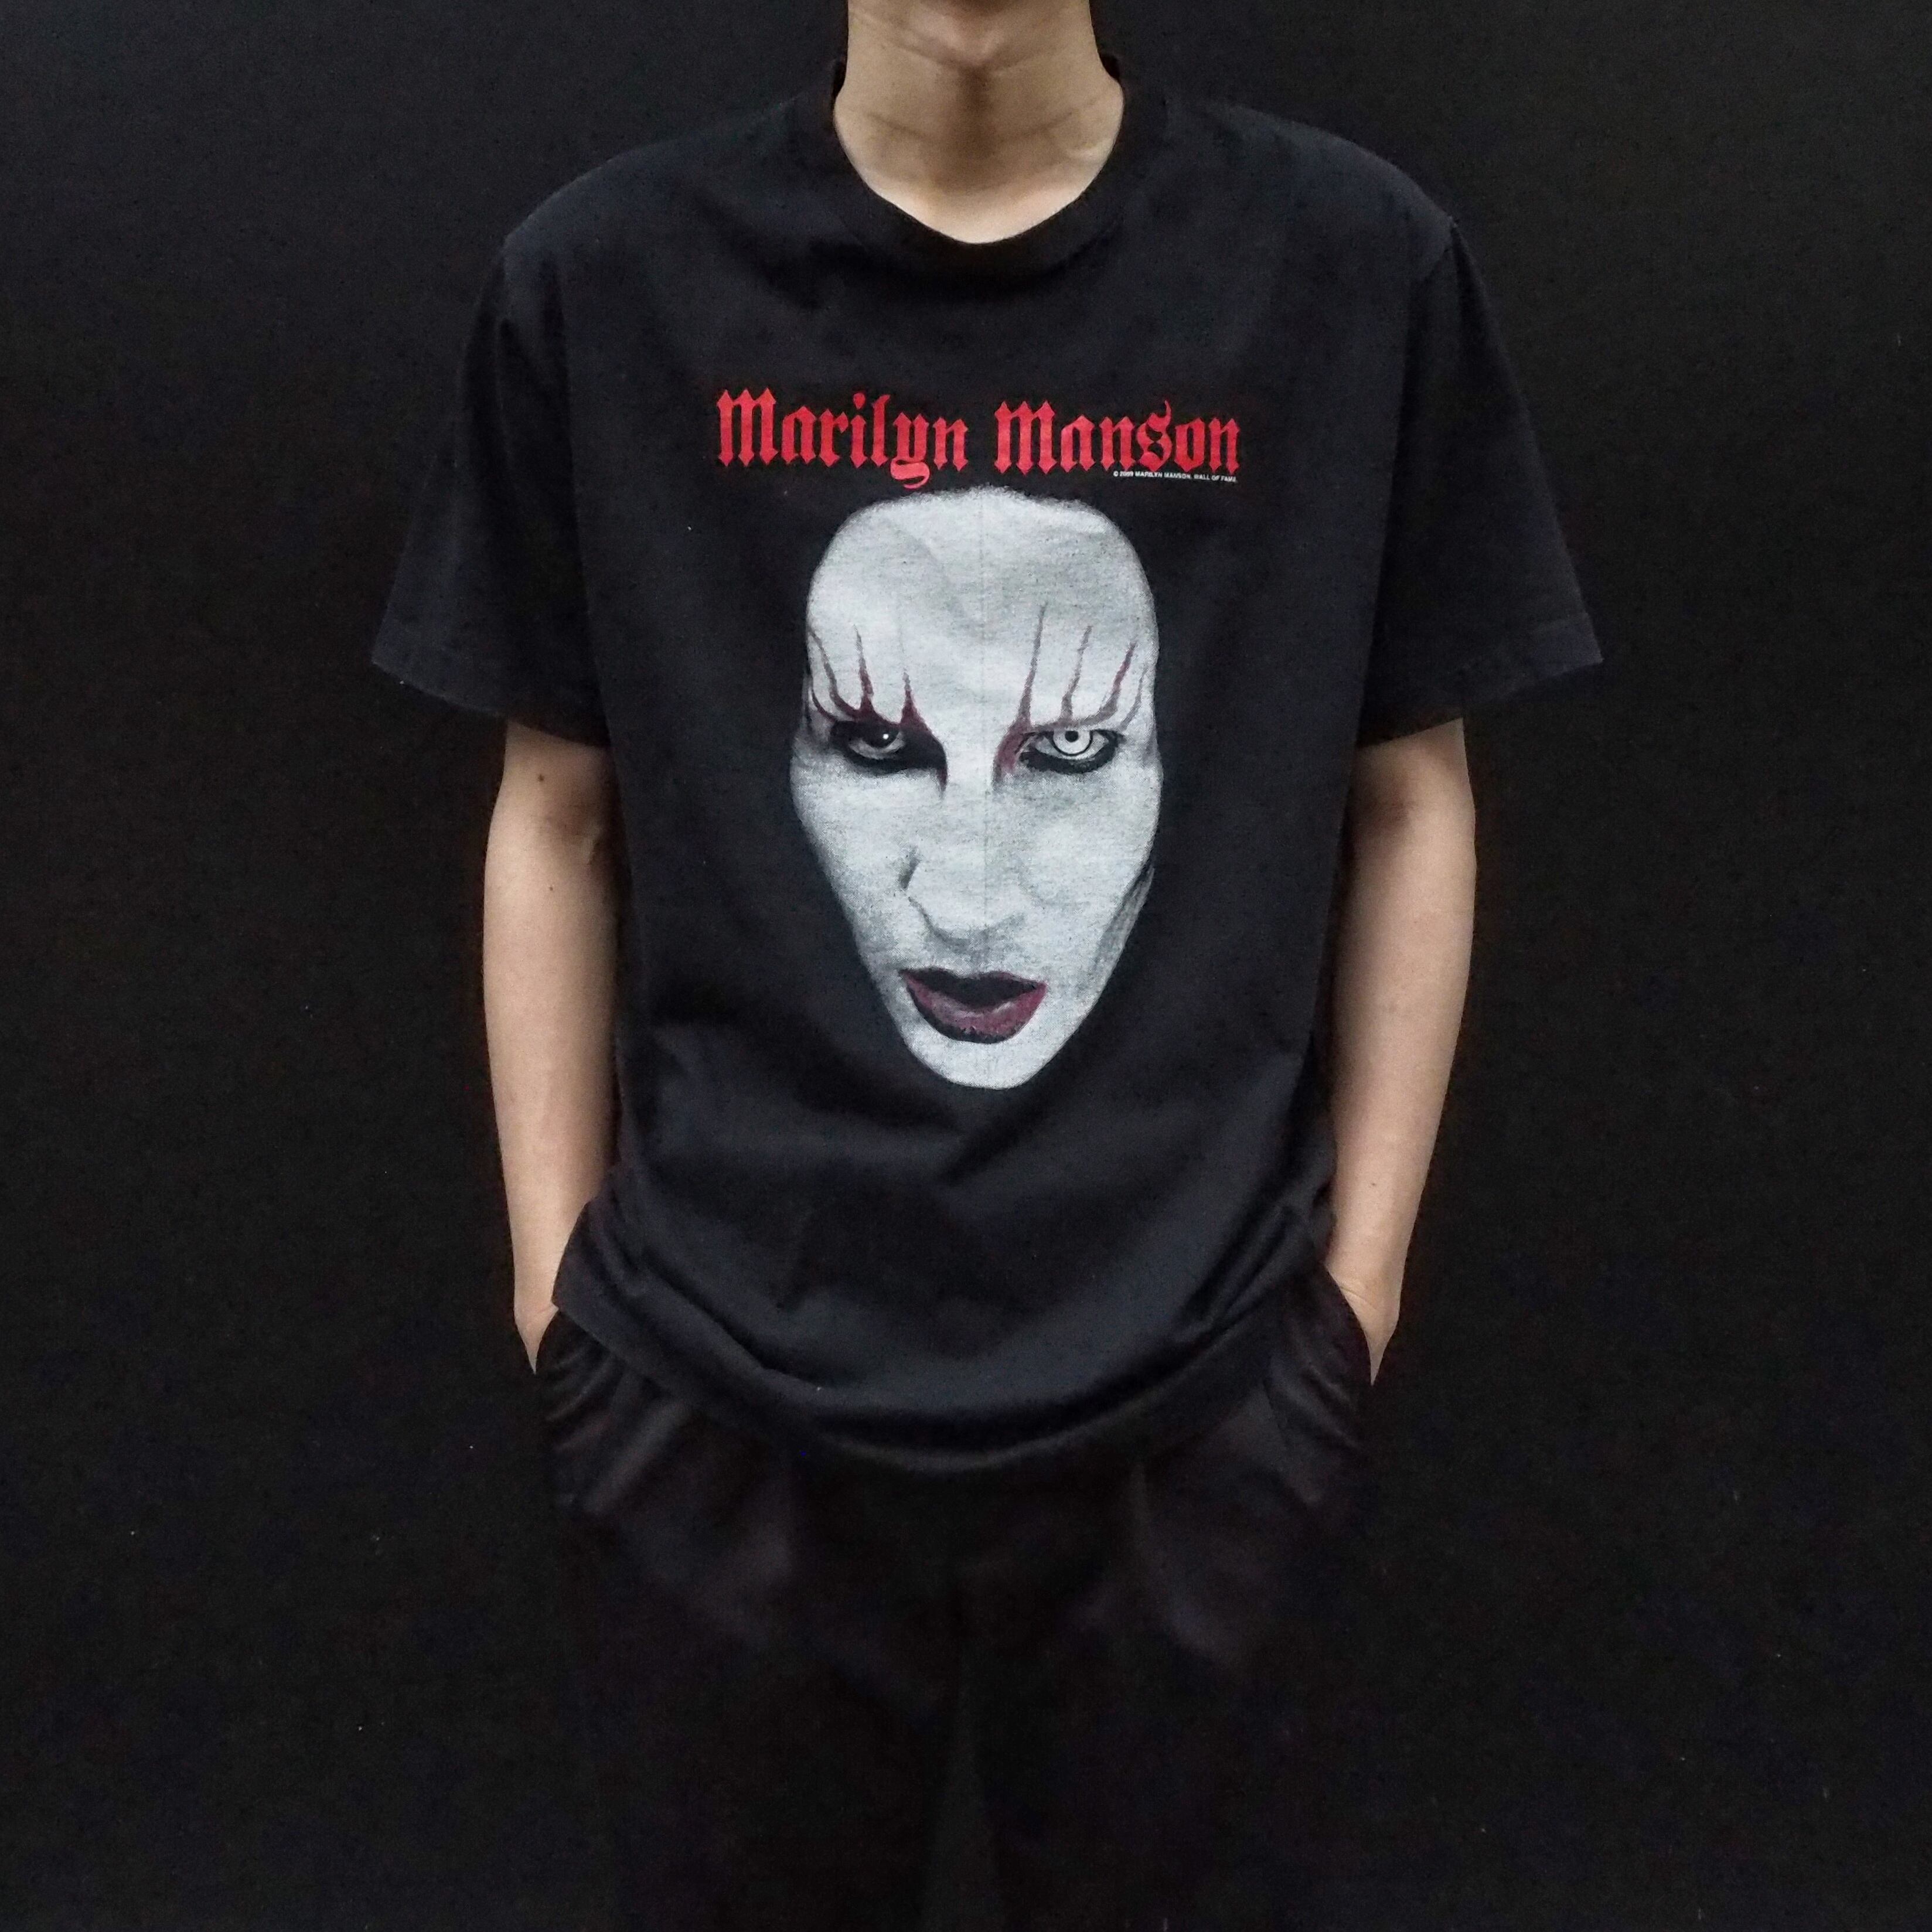 OLD 00's~ Marilyn Manson front printed rock t-shirt s/s | lansdowne 